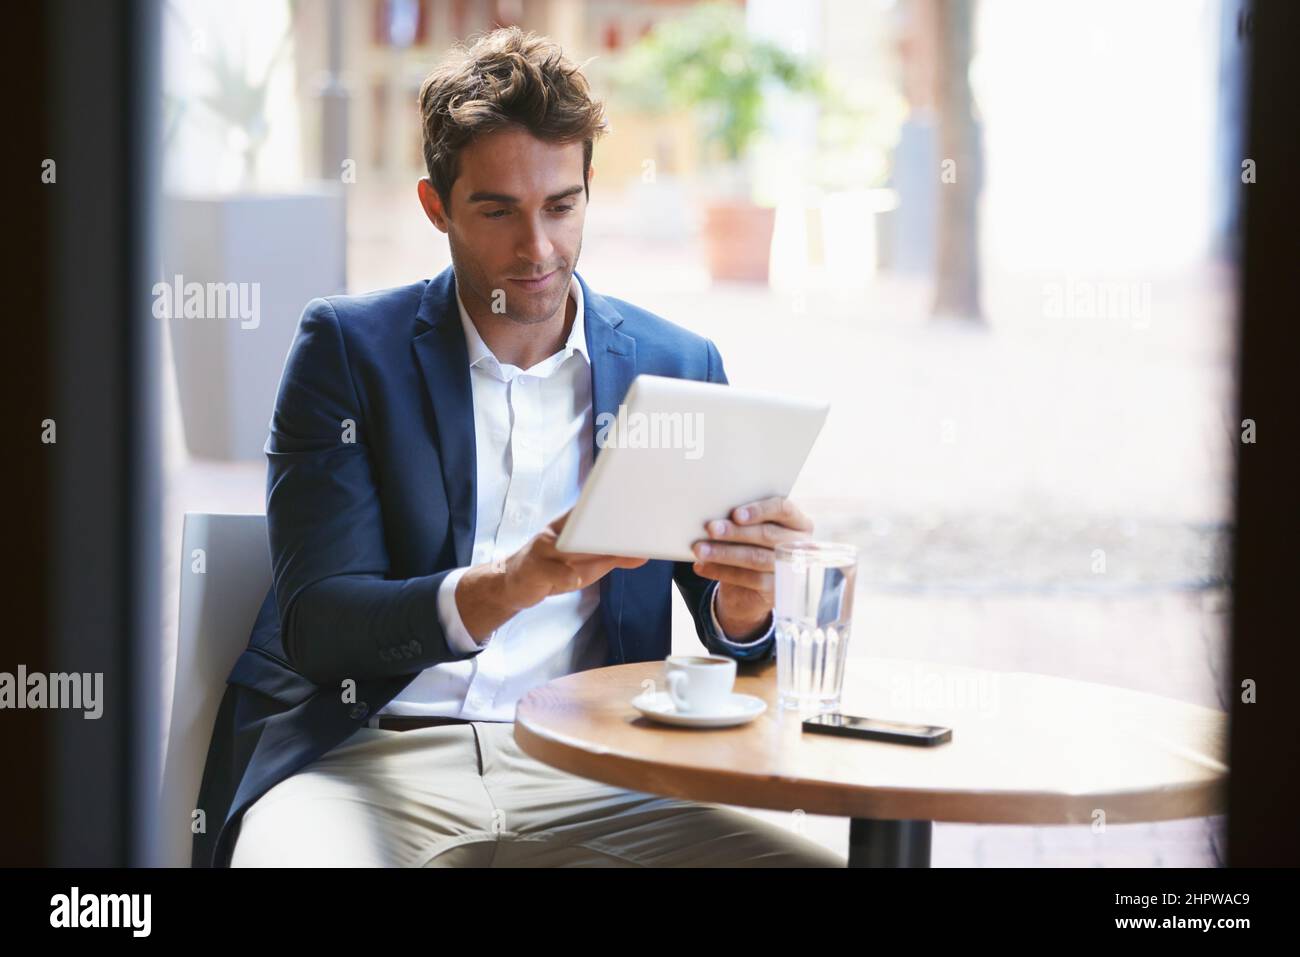 Catching up on his coffee break. Shot of a young businessman enjoying a cup of coffee while using a digital tablet. Stock Photo